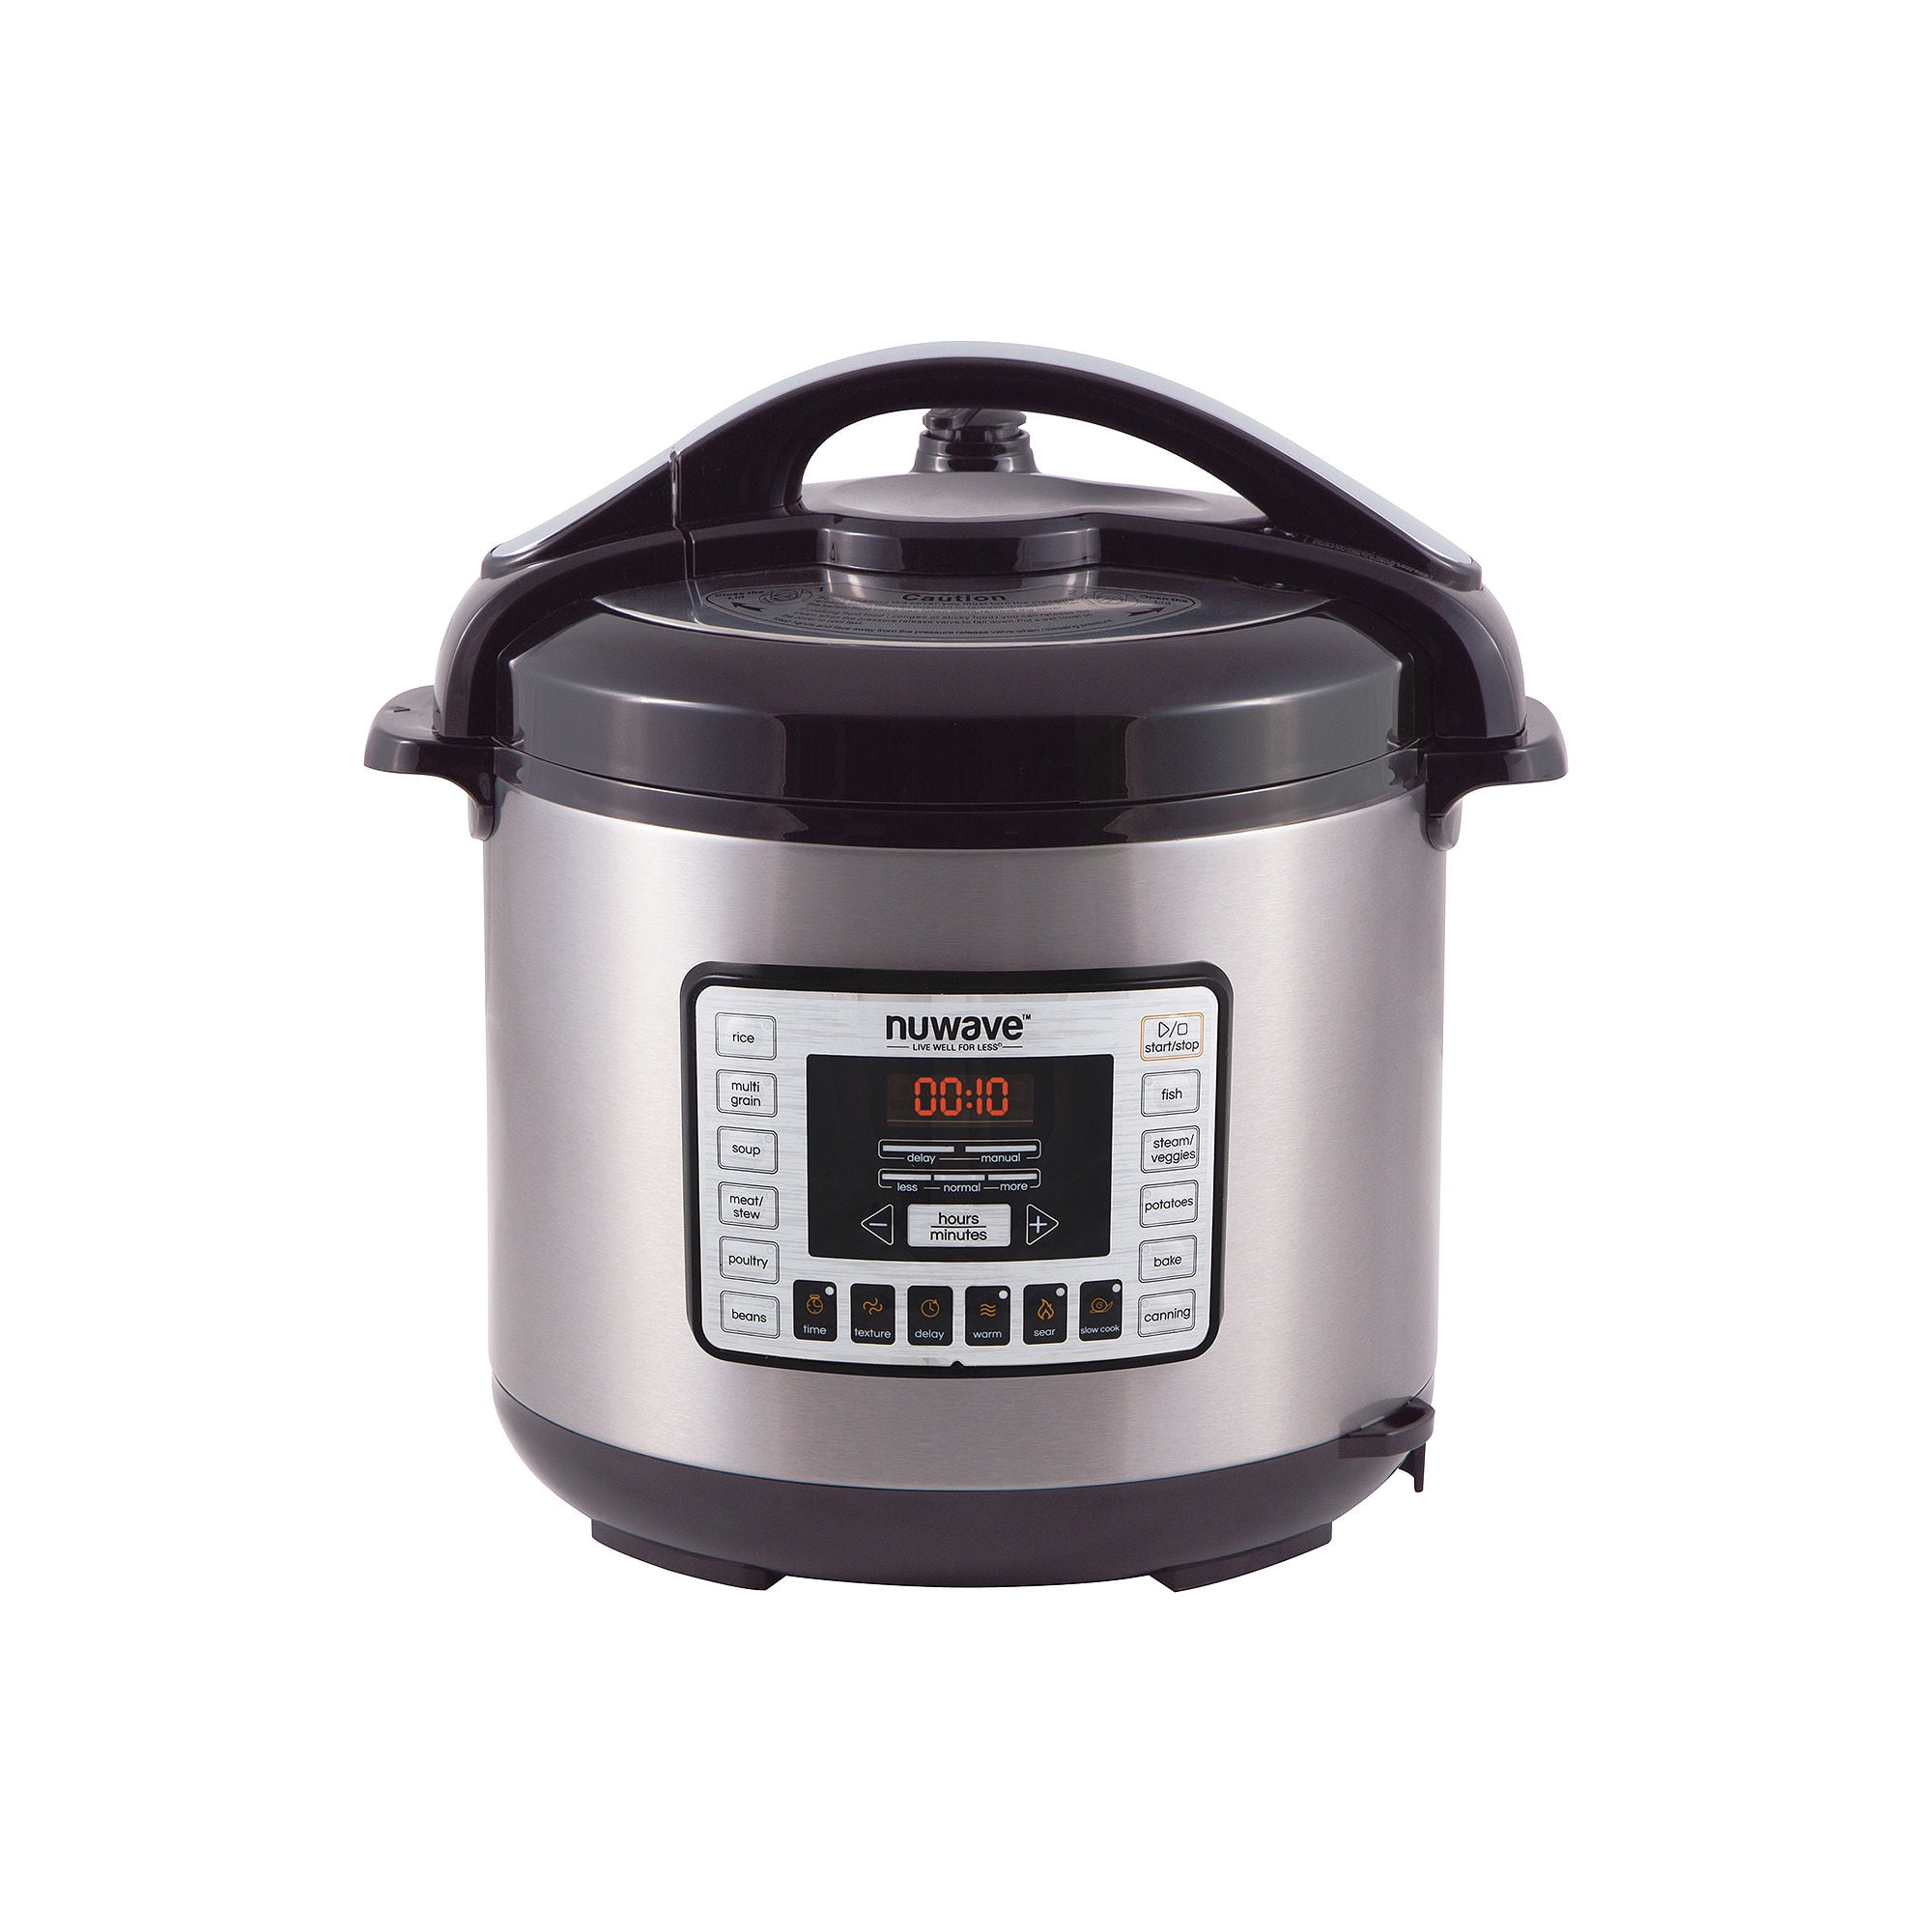 Farberware Stainless Steel Induction Stovetop Pressure Cooker, 8-Quart